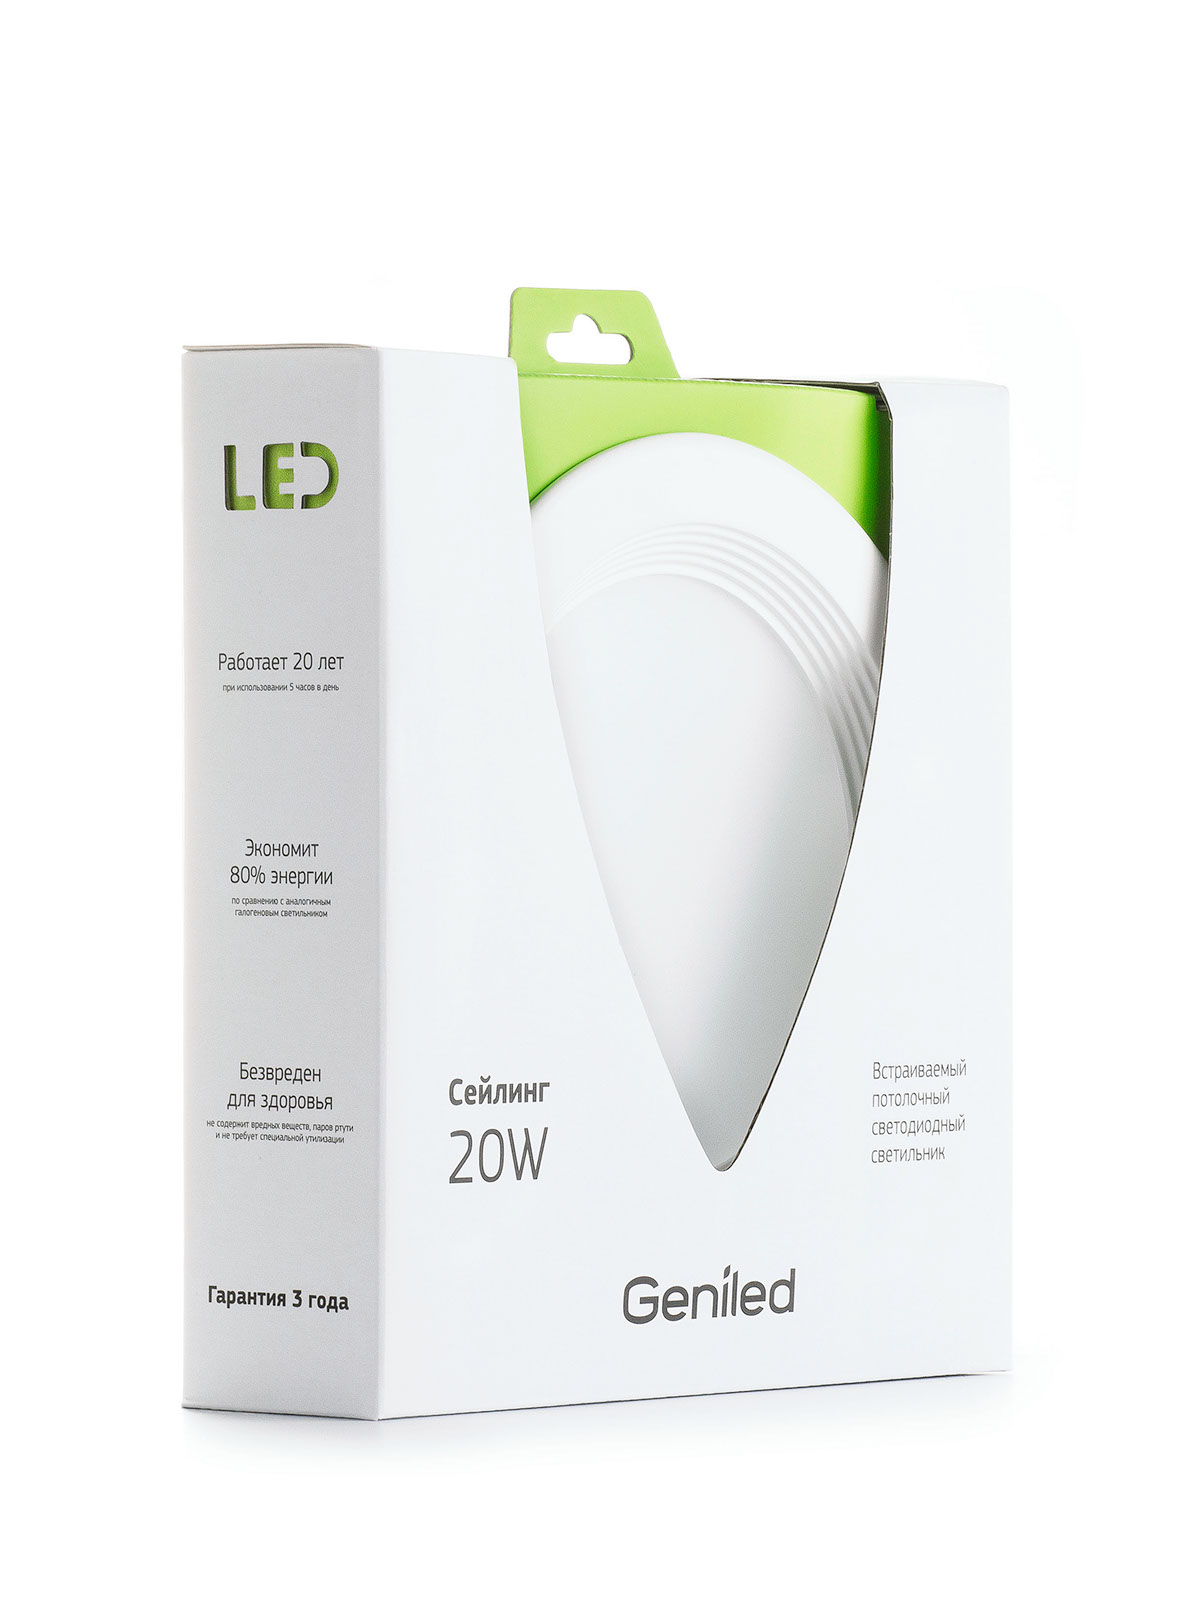 doit geniled Pack package bulb led Boxing series Pear hanging pear yekaterinburg green eco ecological